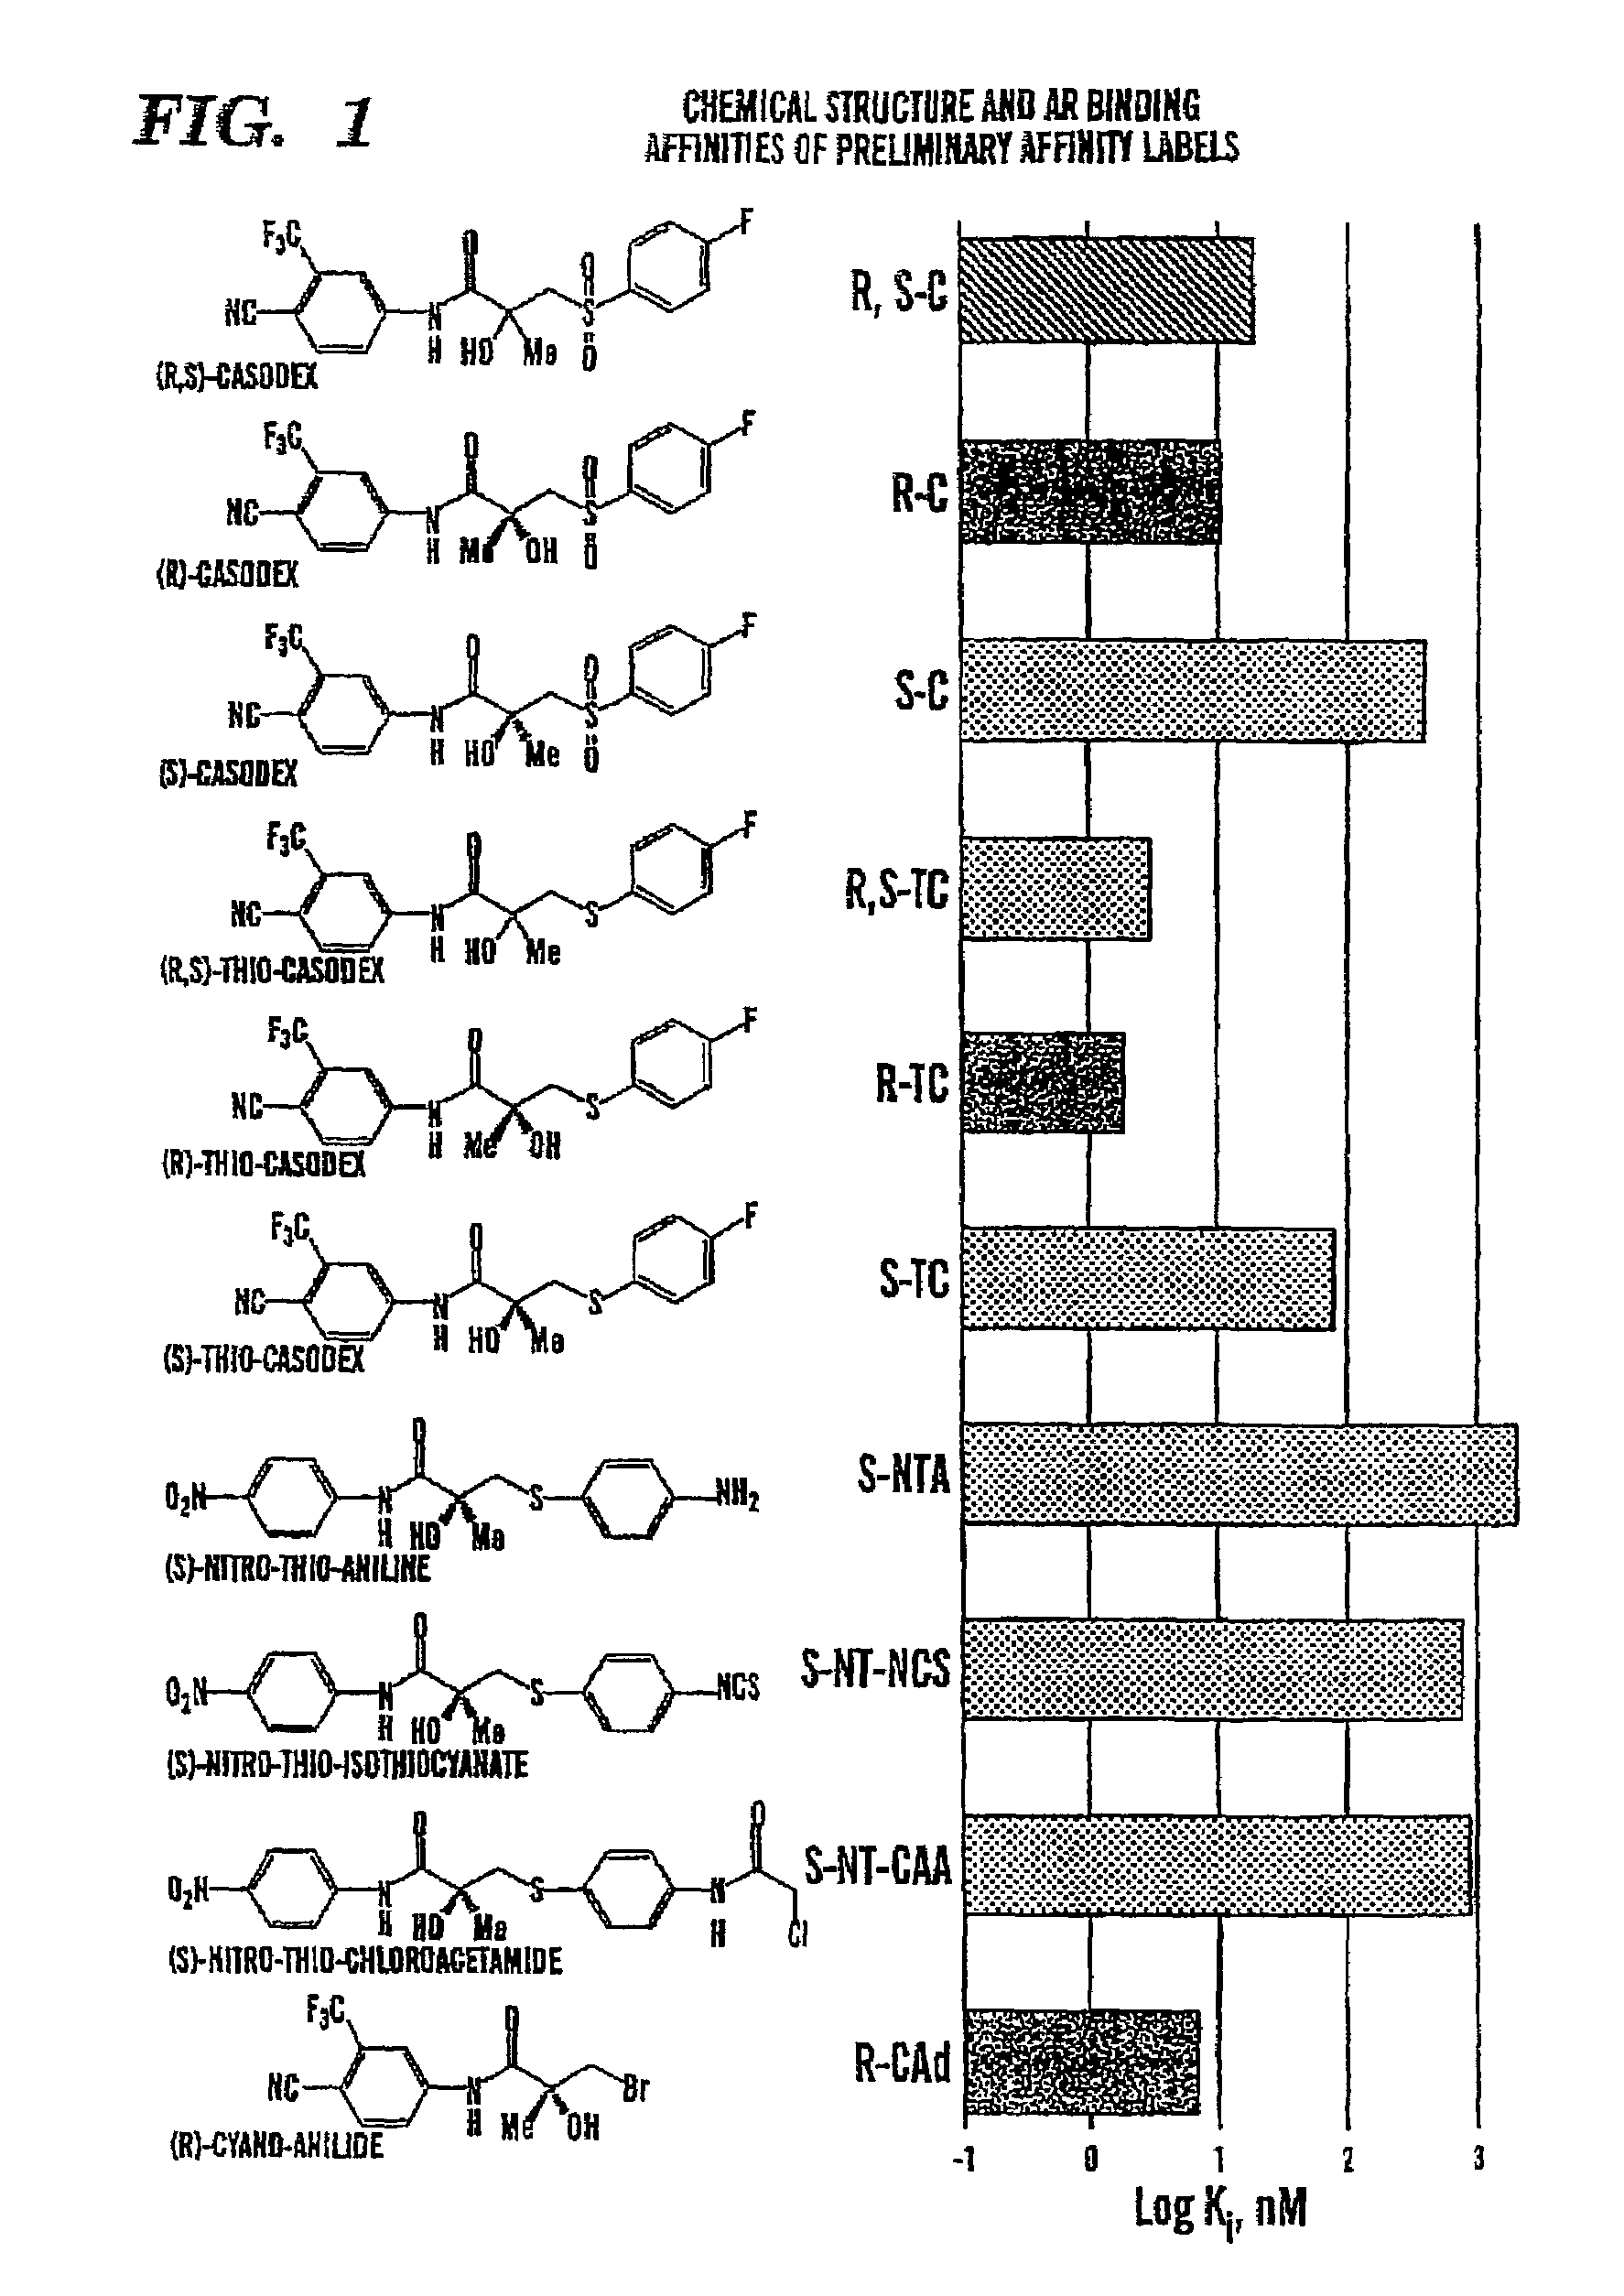 Irreversible non-steroidal antagonist compound and its use in the treatment of prostate cancer